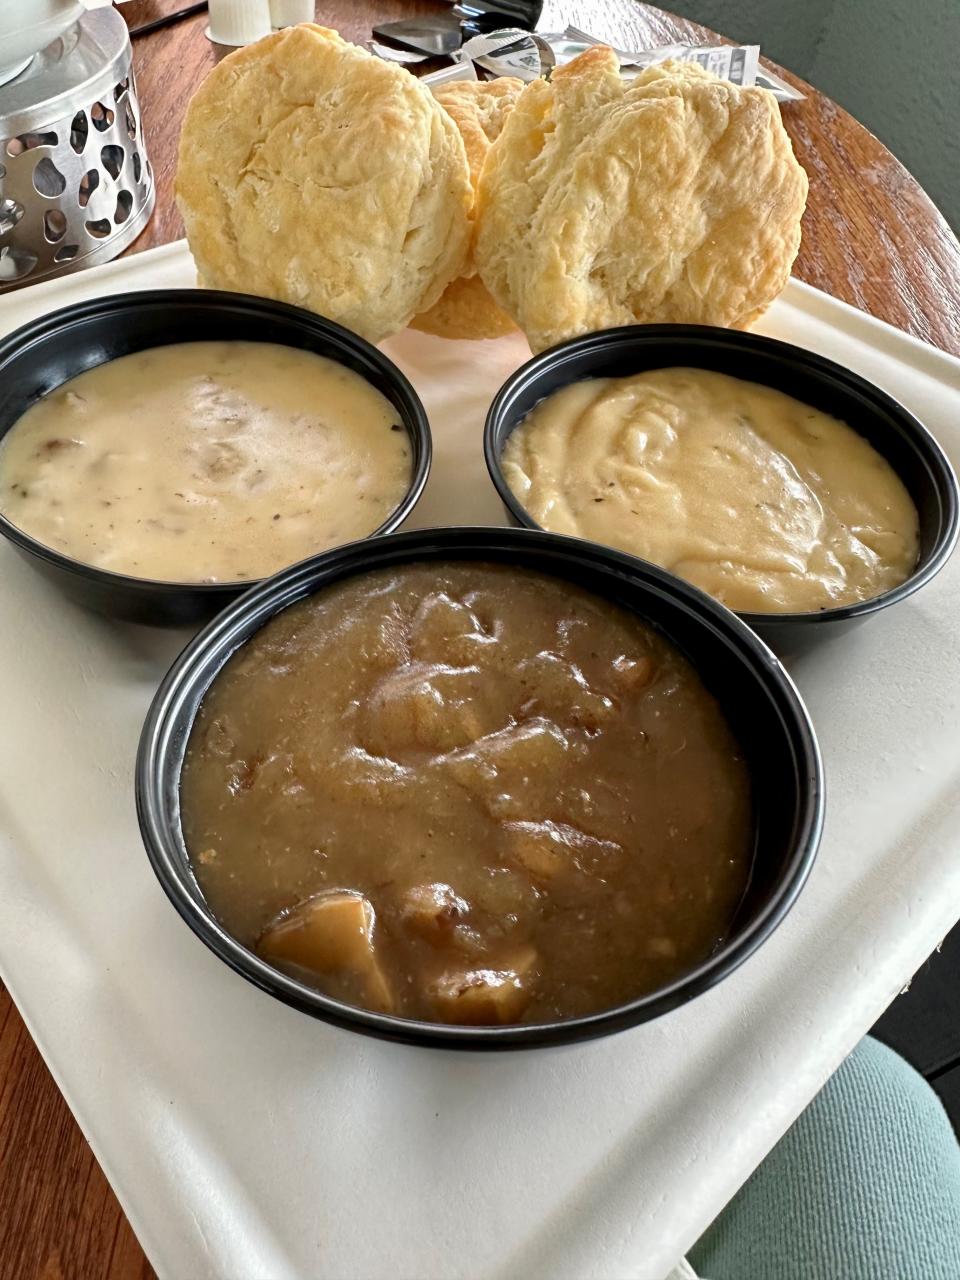 Biscuits and a Flight of 3 Gravies at Harvest Thyme Kitchen featured three of the best homemade biscuits you ever will get from a restaurant with a choice from among four gravies: bacon, chicken-herb, mushroom-Chardonnay and sausage. We selected the latter three.